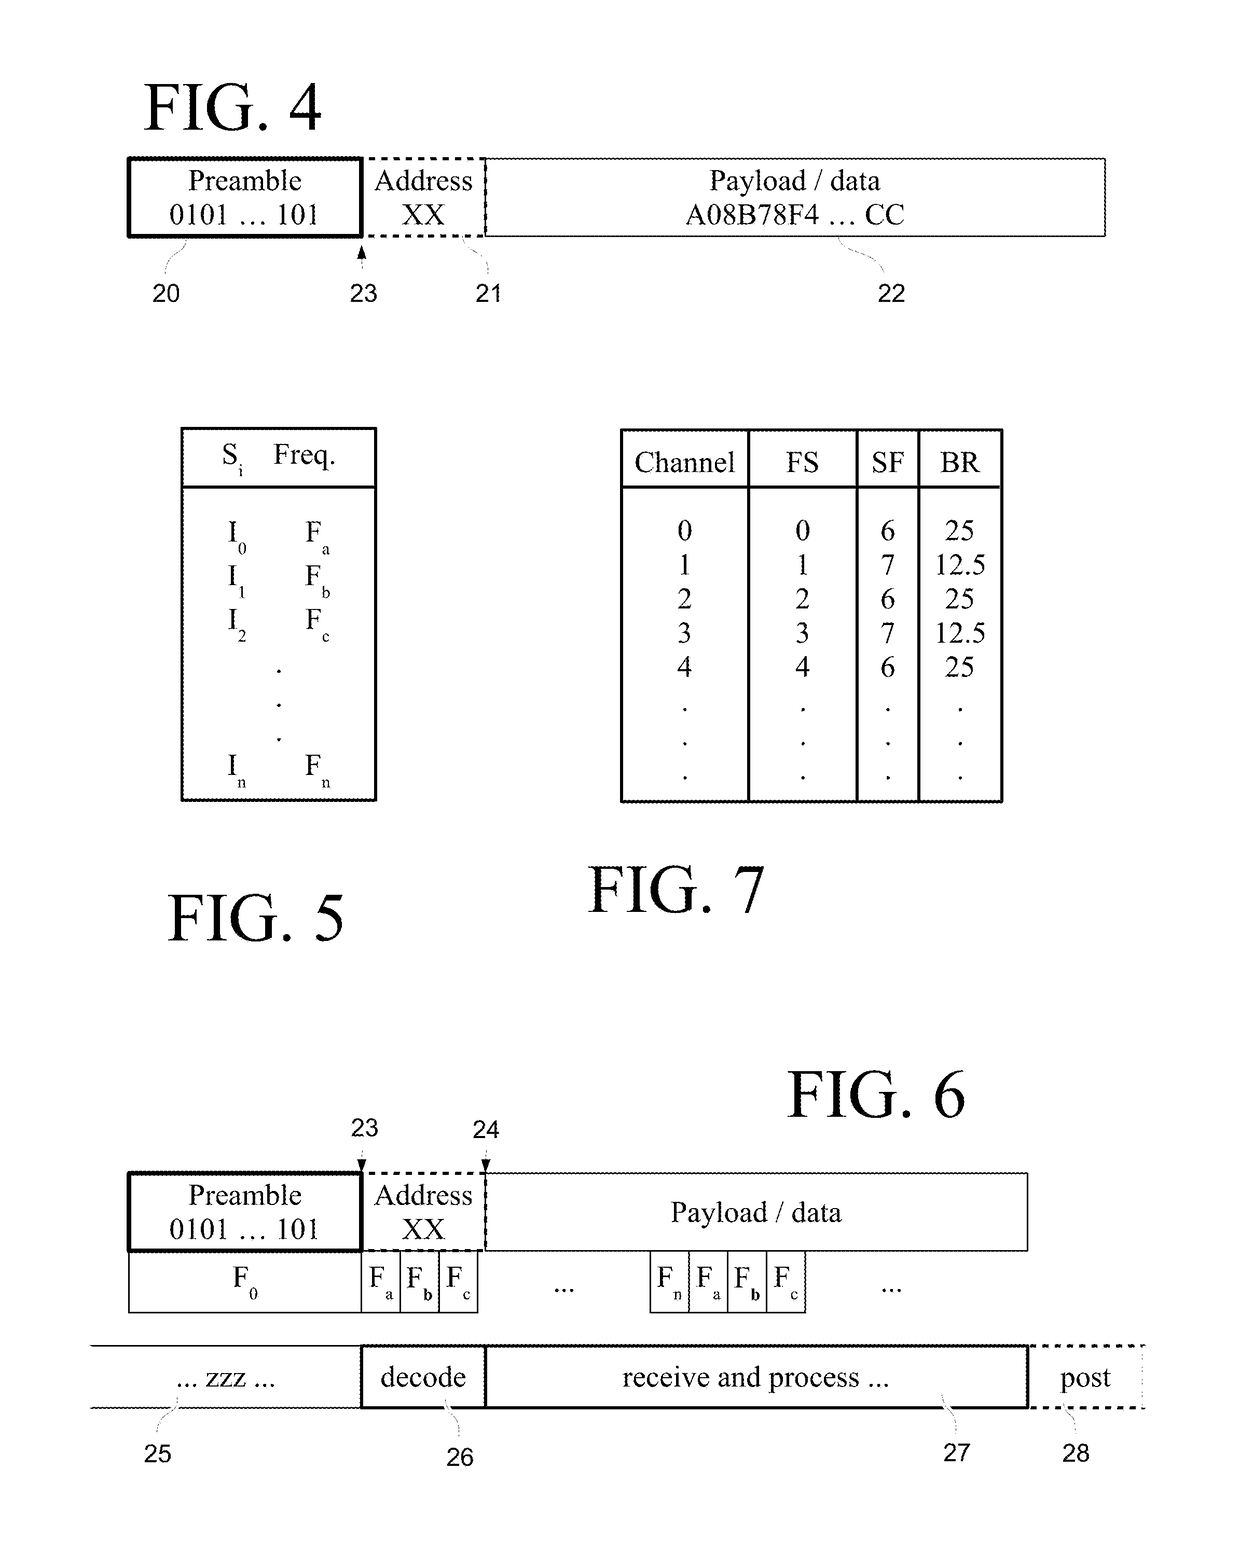 Deployment and communications test of intermediate-range devices using a short-range wireless mobile device